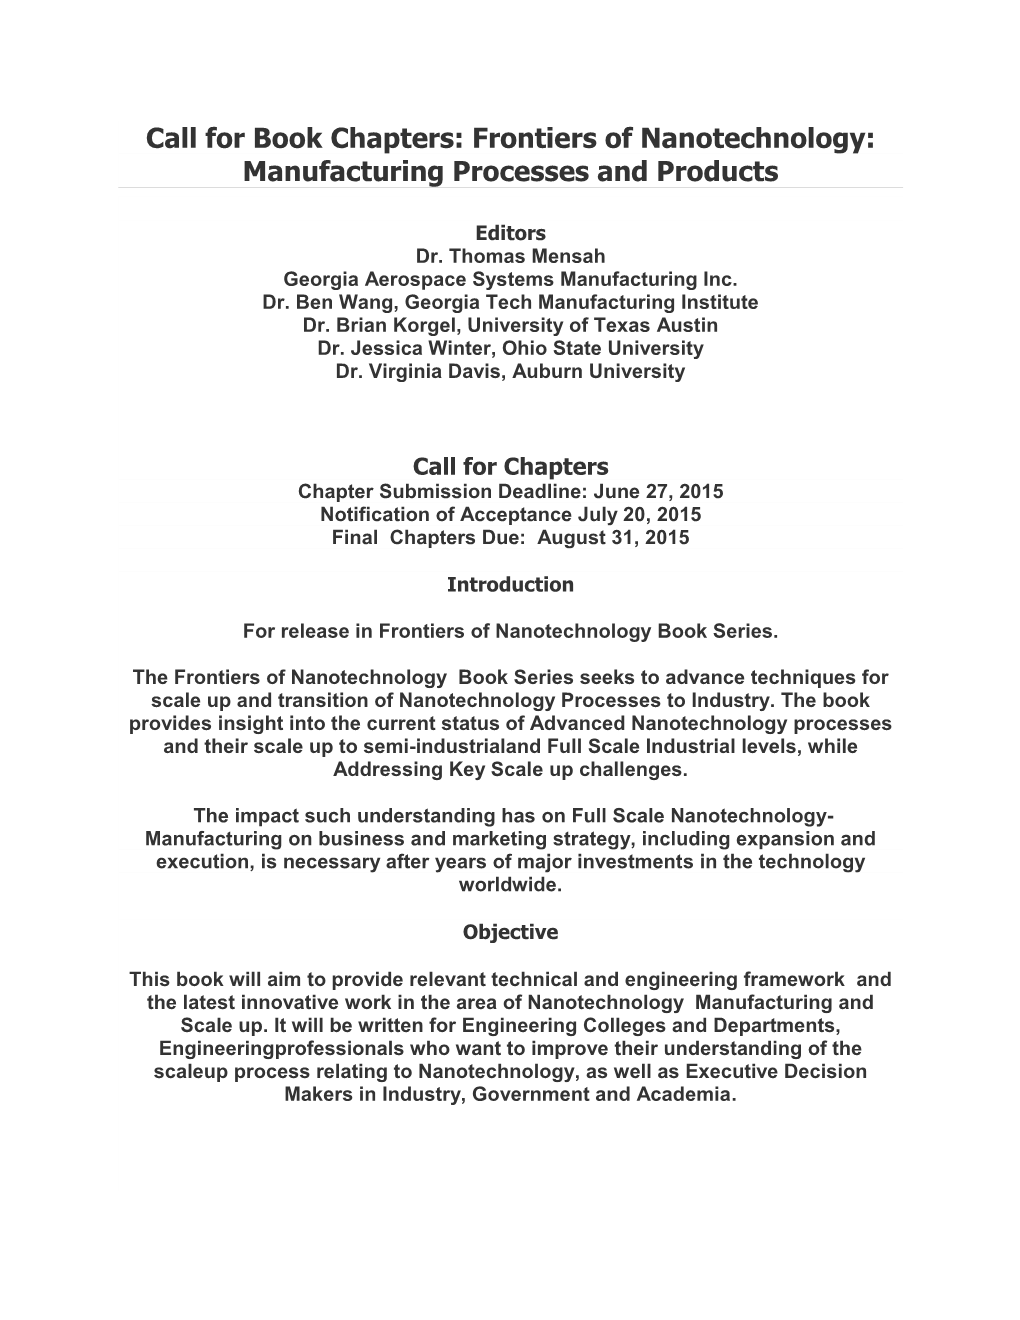 Call for Book Chapters: Frontiers of Nanotechnology: Manufacturing Processes and Products